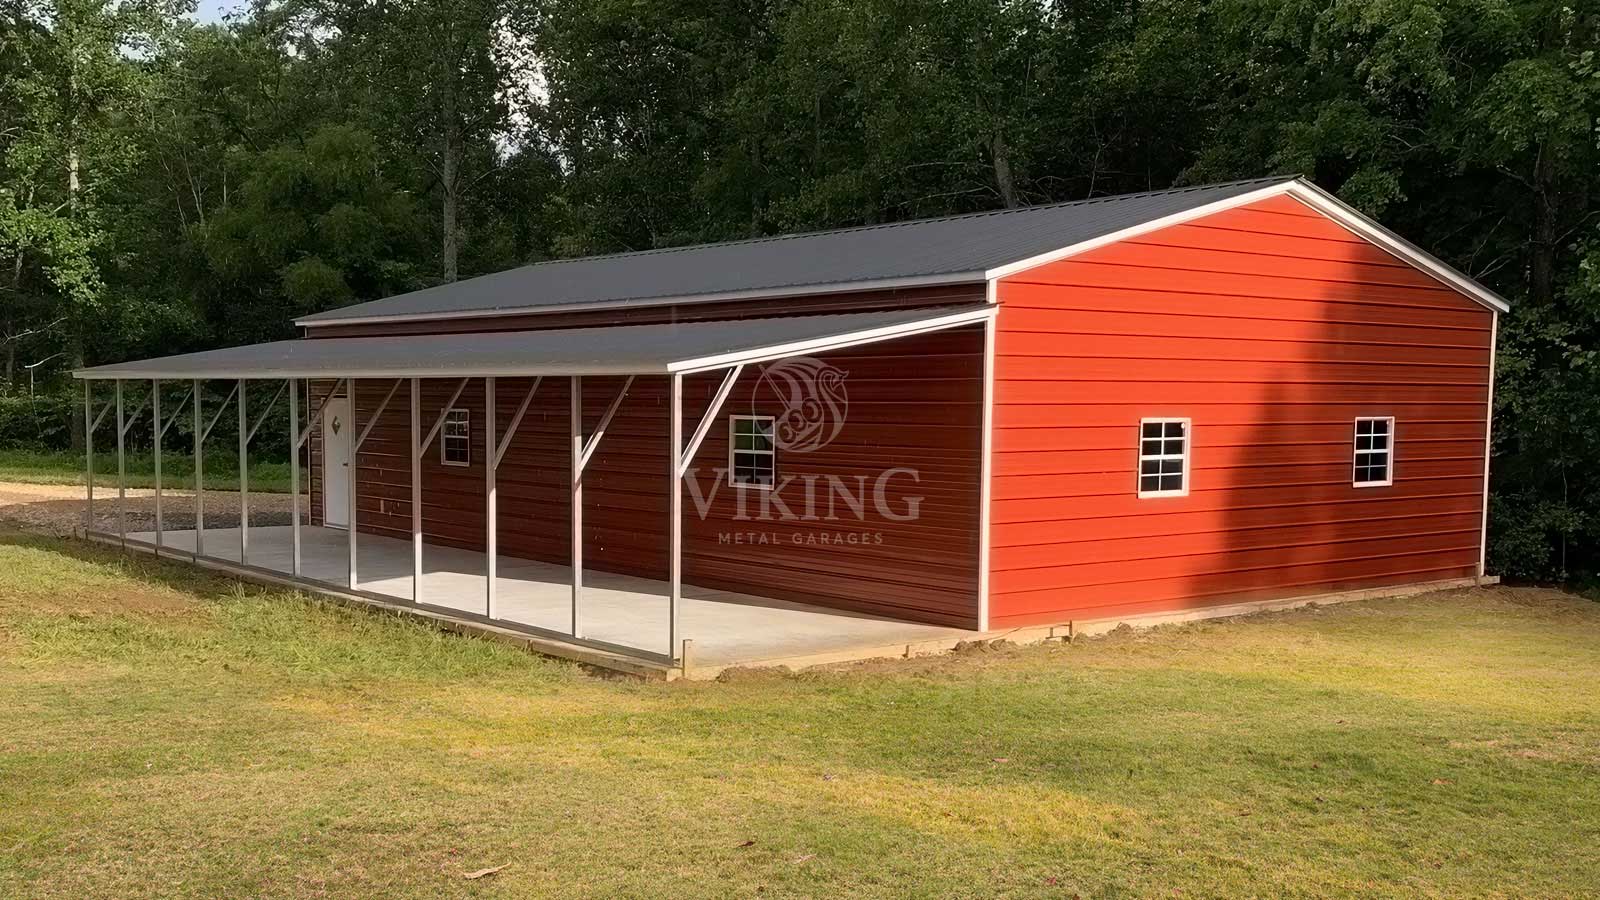 Top Of The Line Authorized Dealer Viking Metal Garages